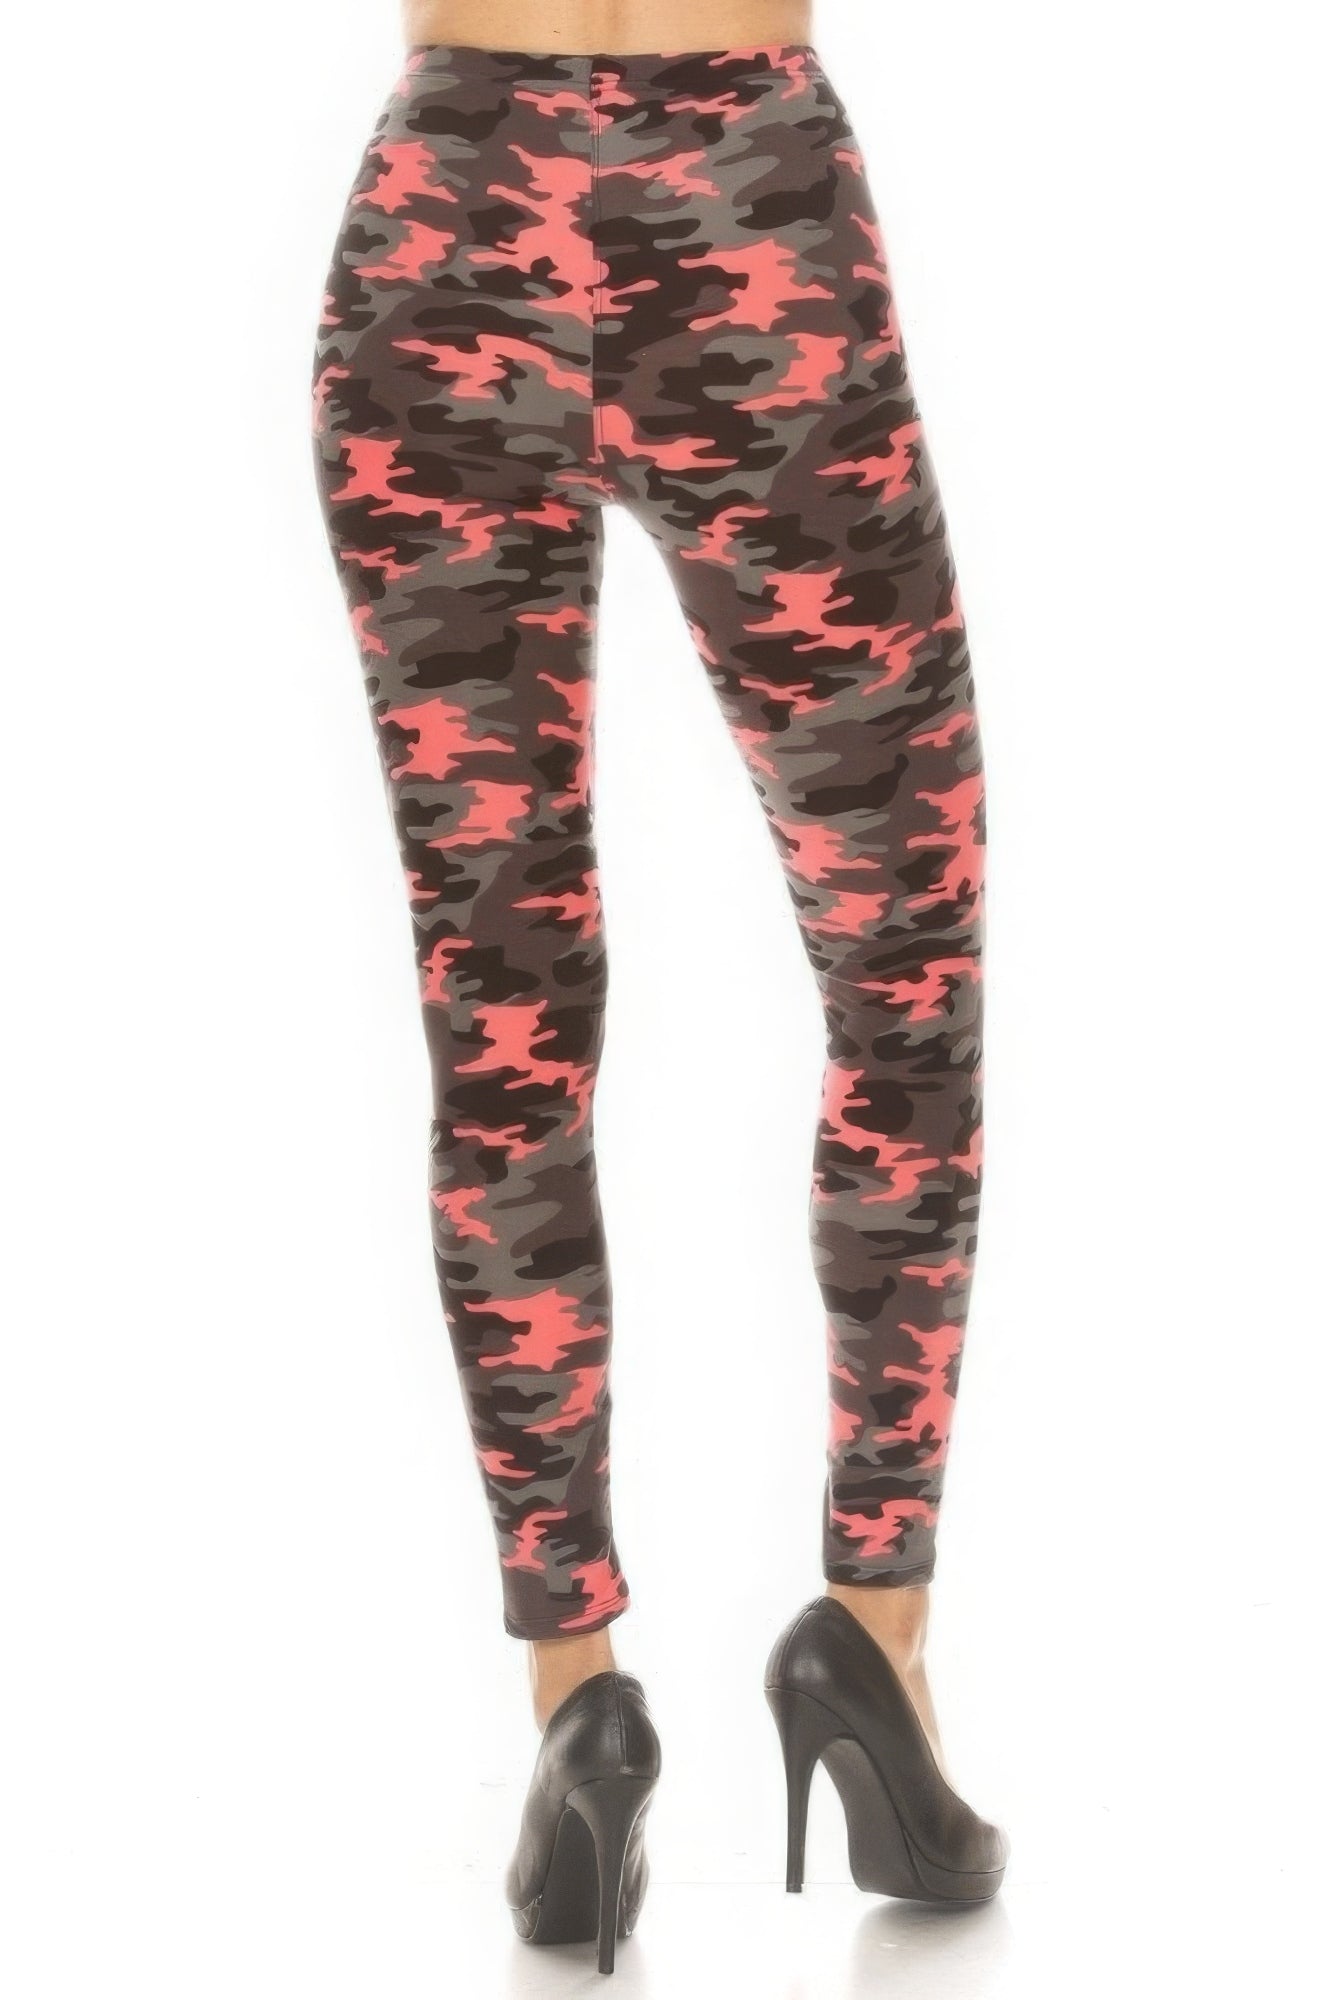 a woman person a pair of camouflage print leggings